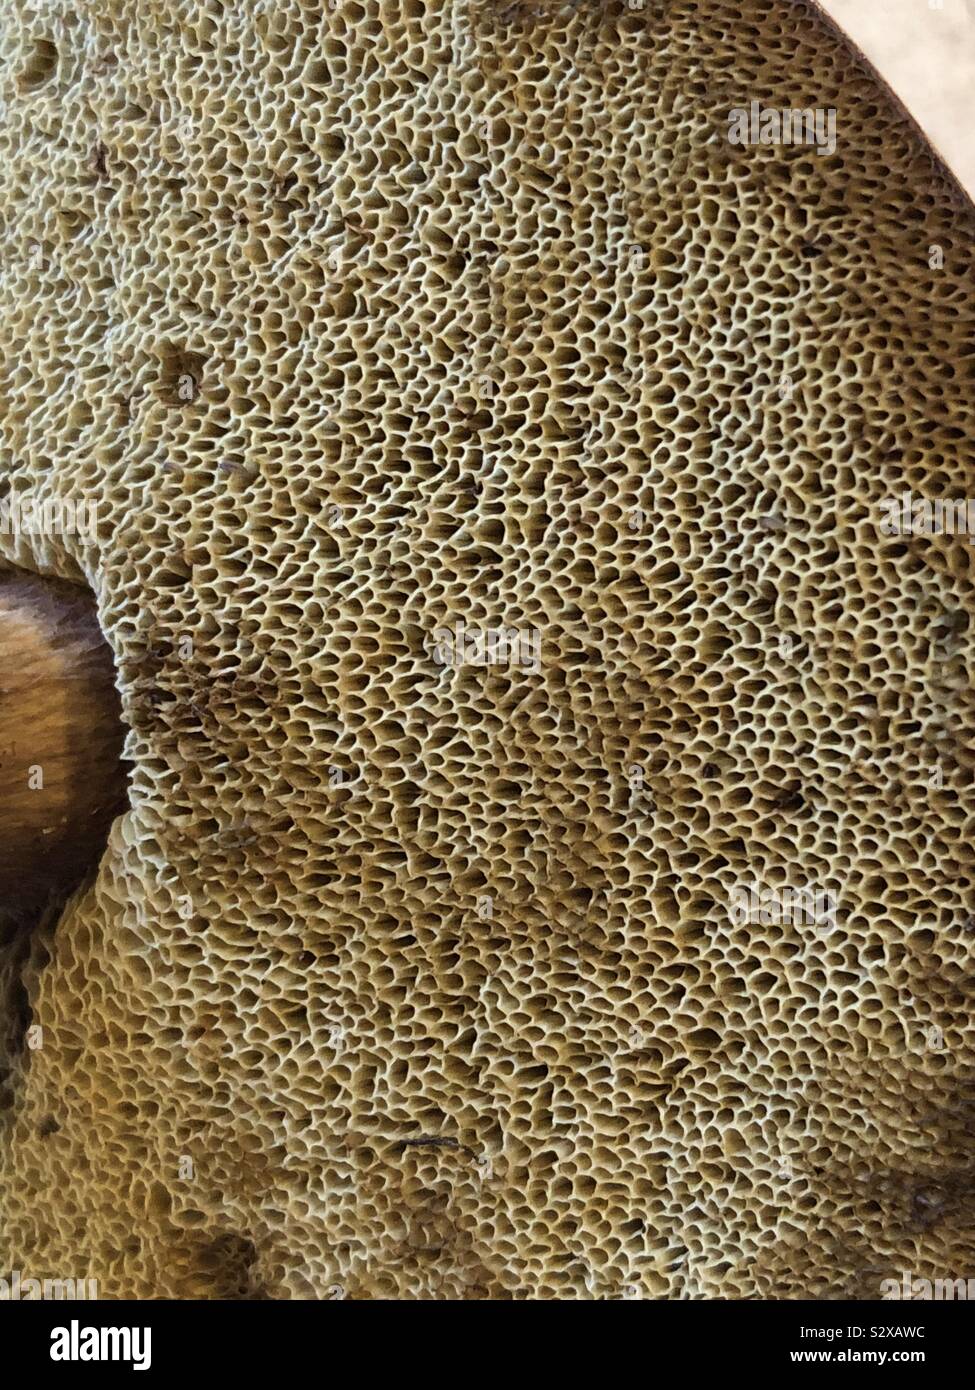 Close up of the pores on the underside of a bolette mushroom Stock Photo